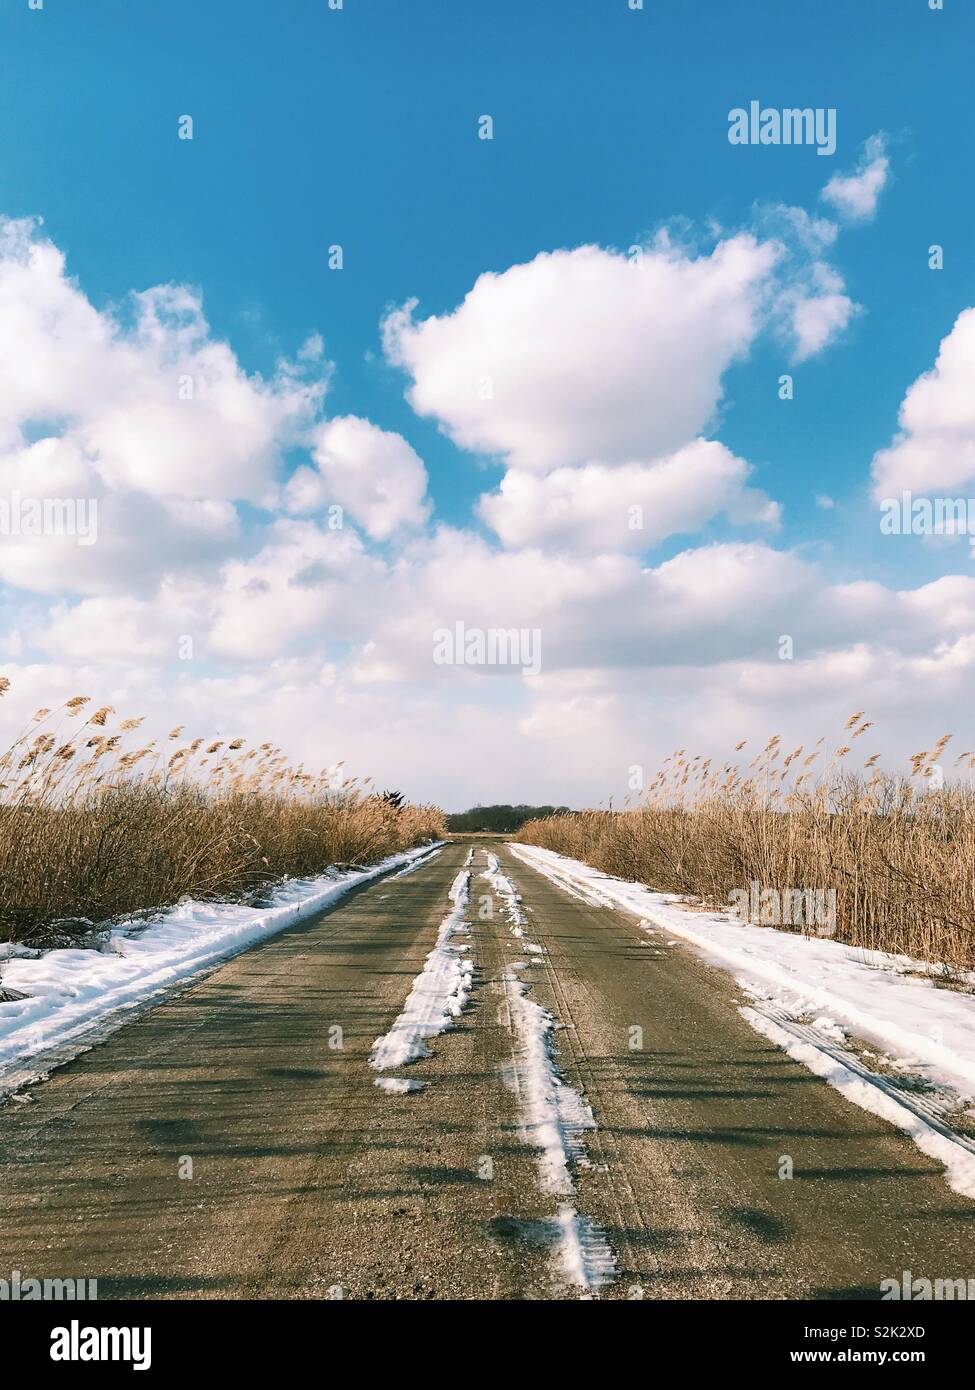 Looking down the middle of a snowy dirt road on the coast of Connecticut, USA. Stock Photo